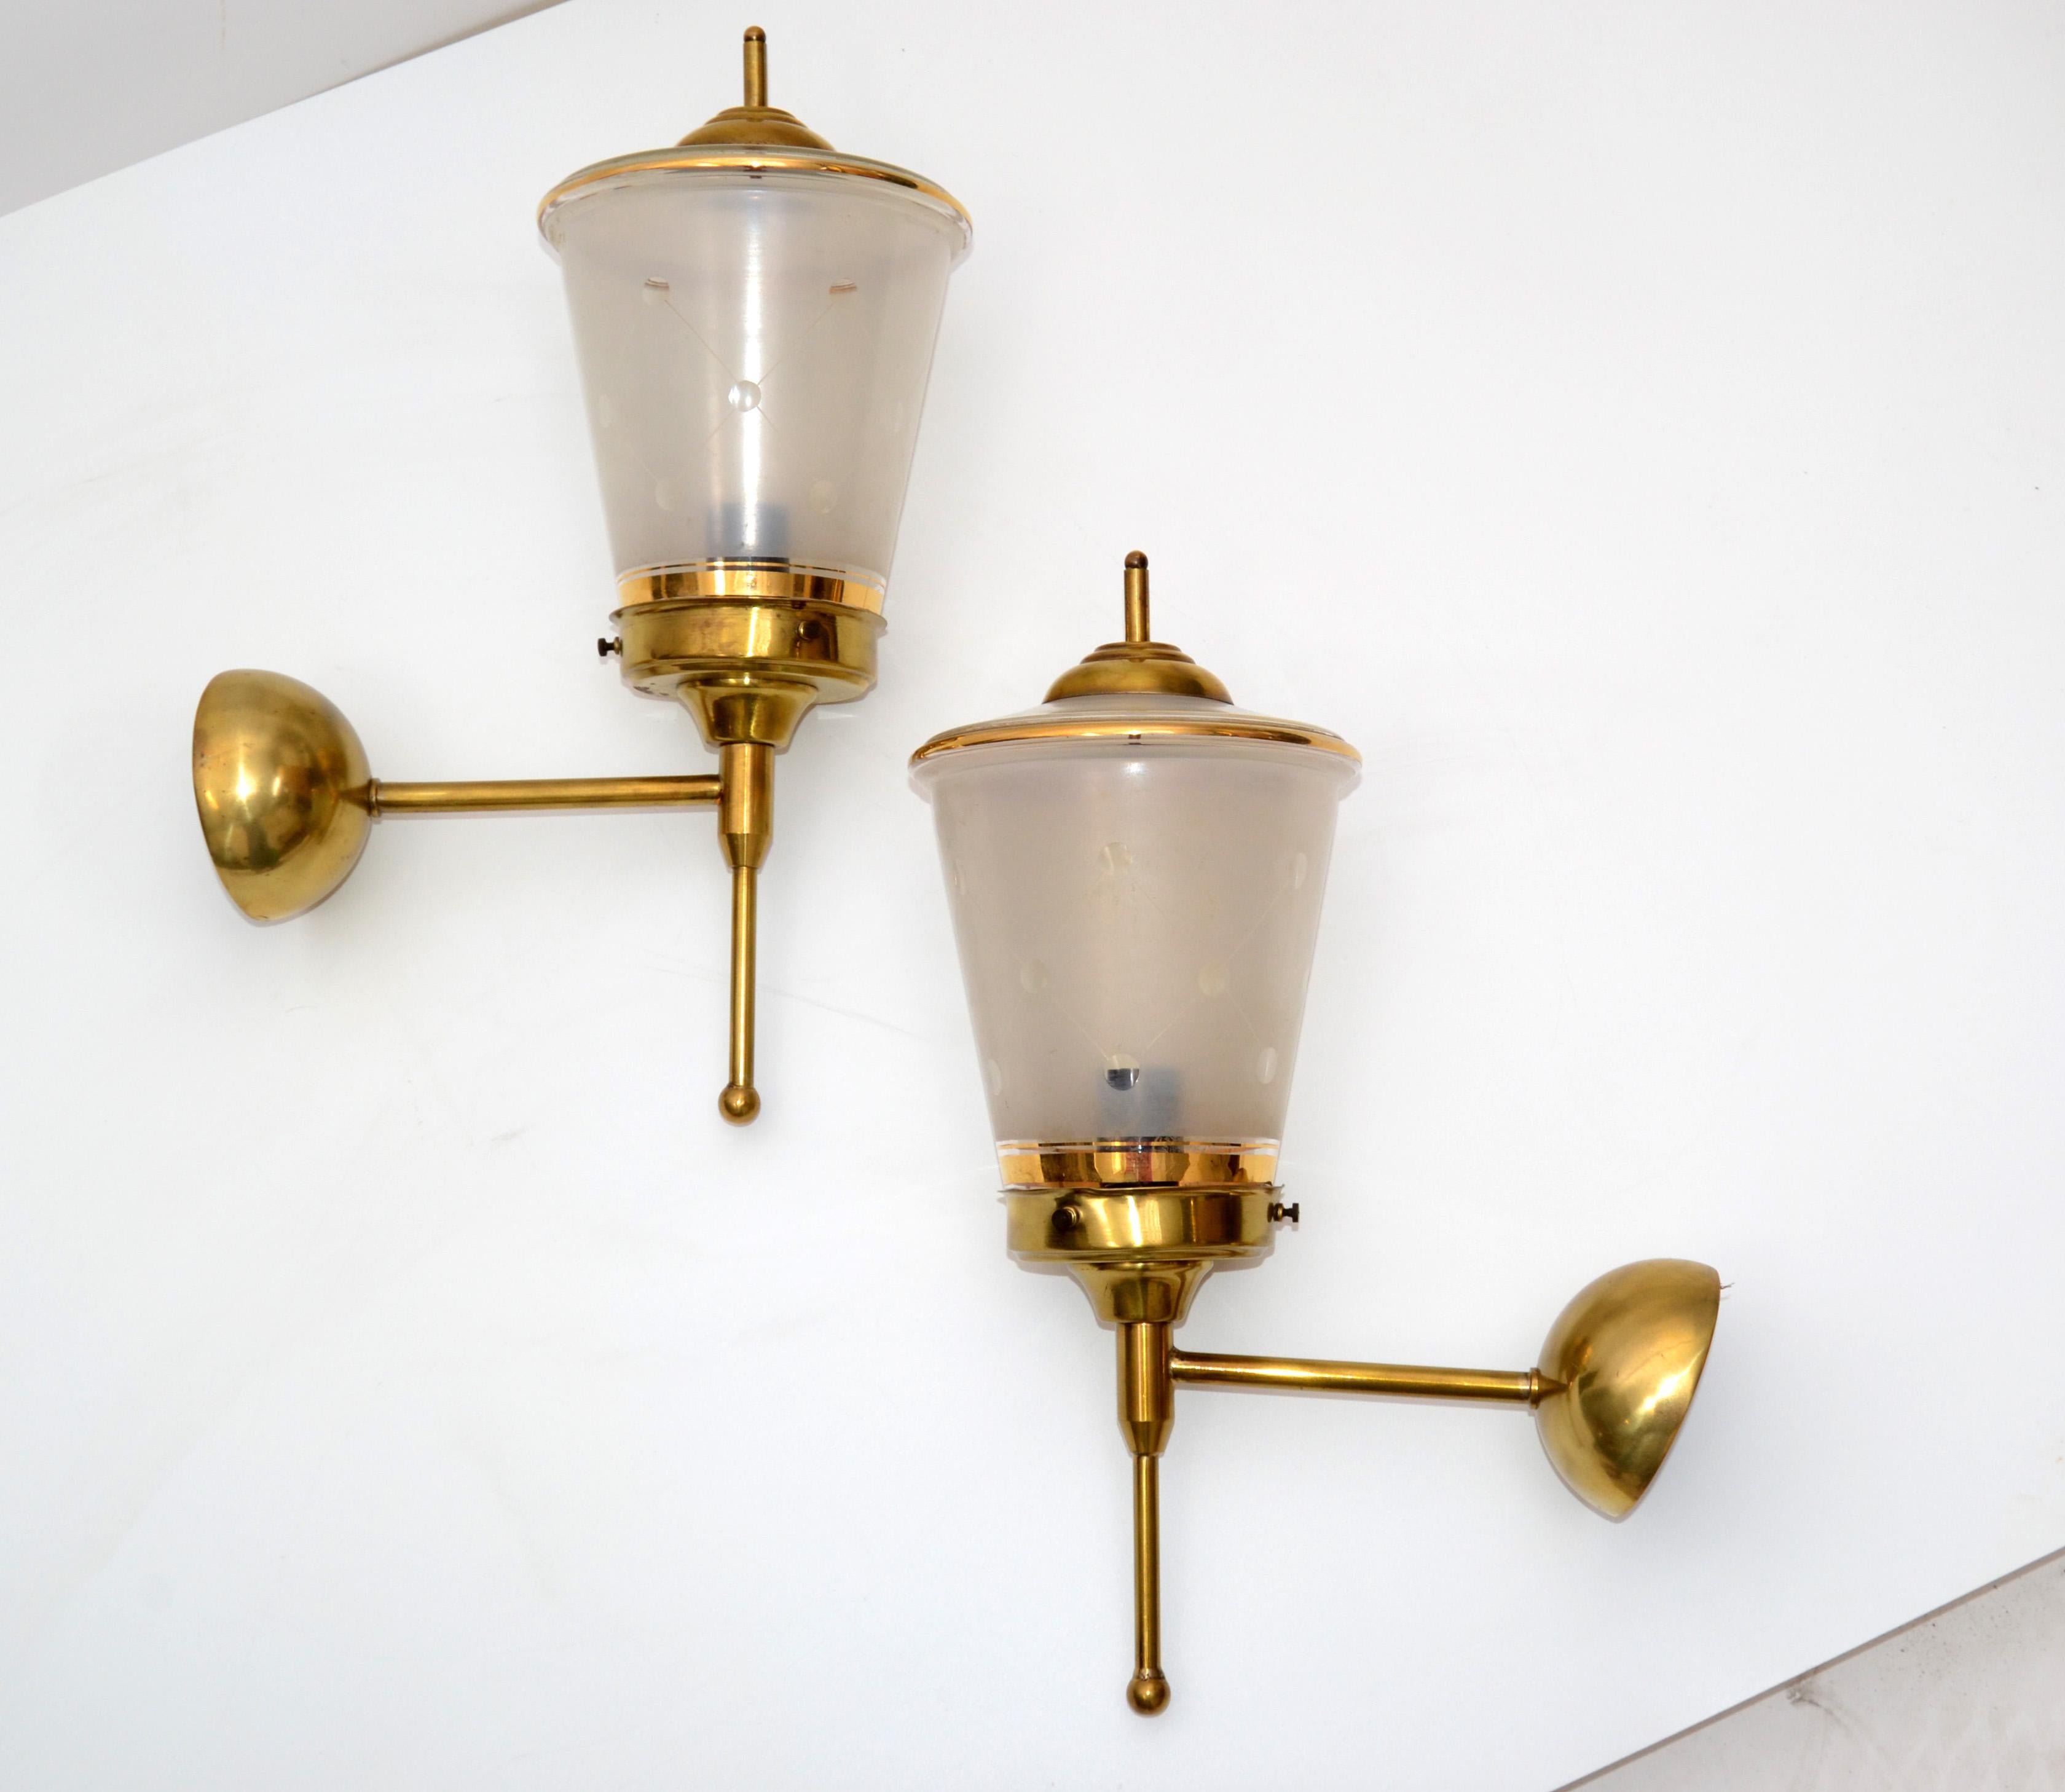 Maison Lunel Pair of Ornate Glass and Brass Lantern Wall Mounted Sconces, France For Sale 8